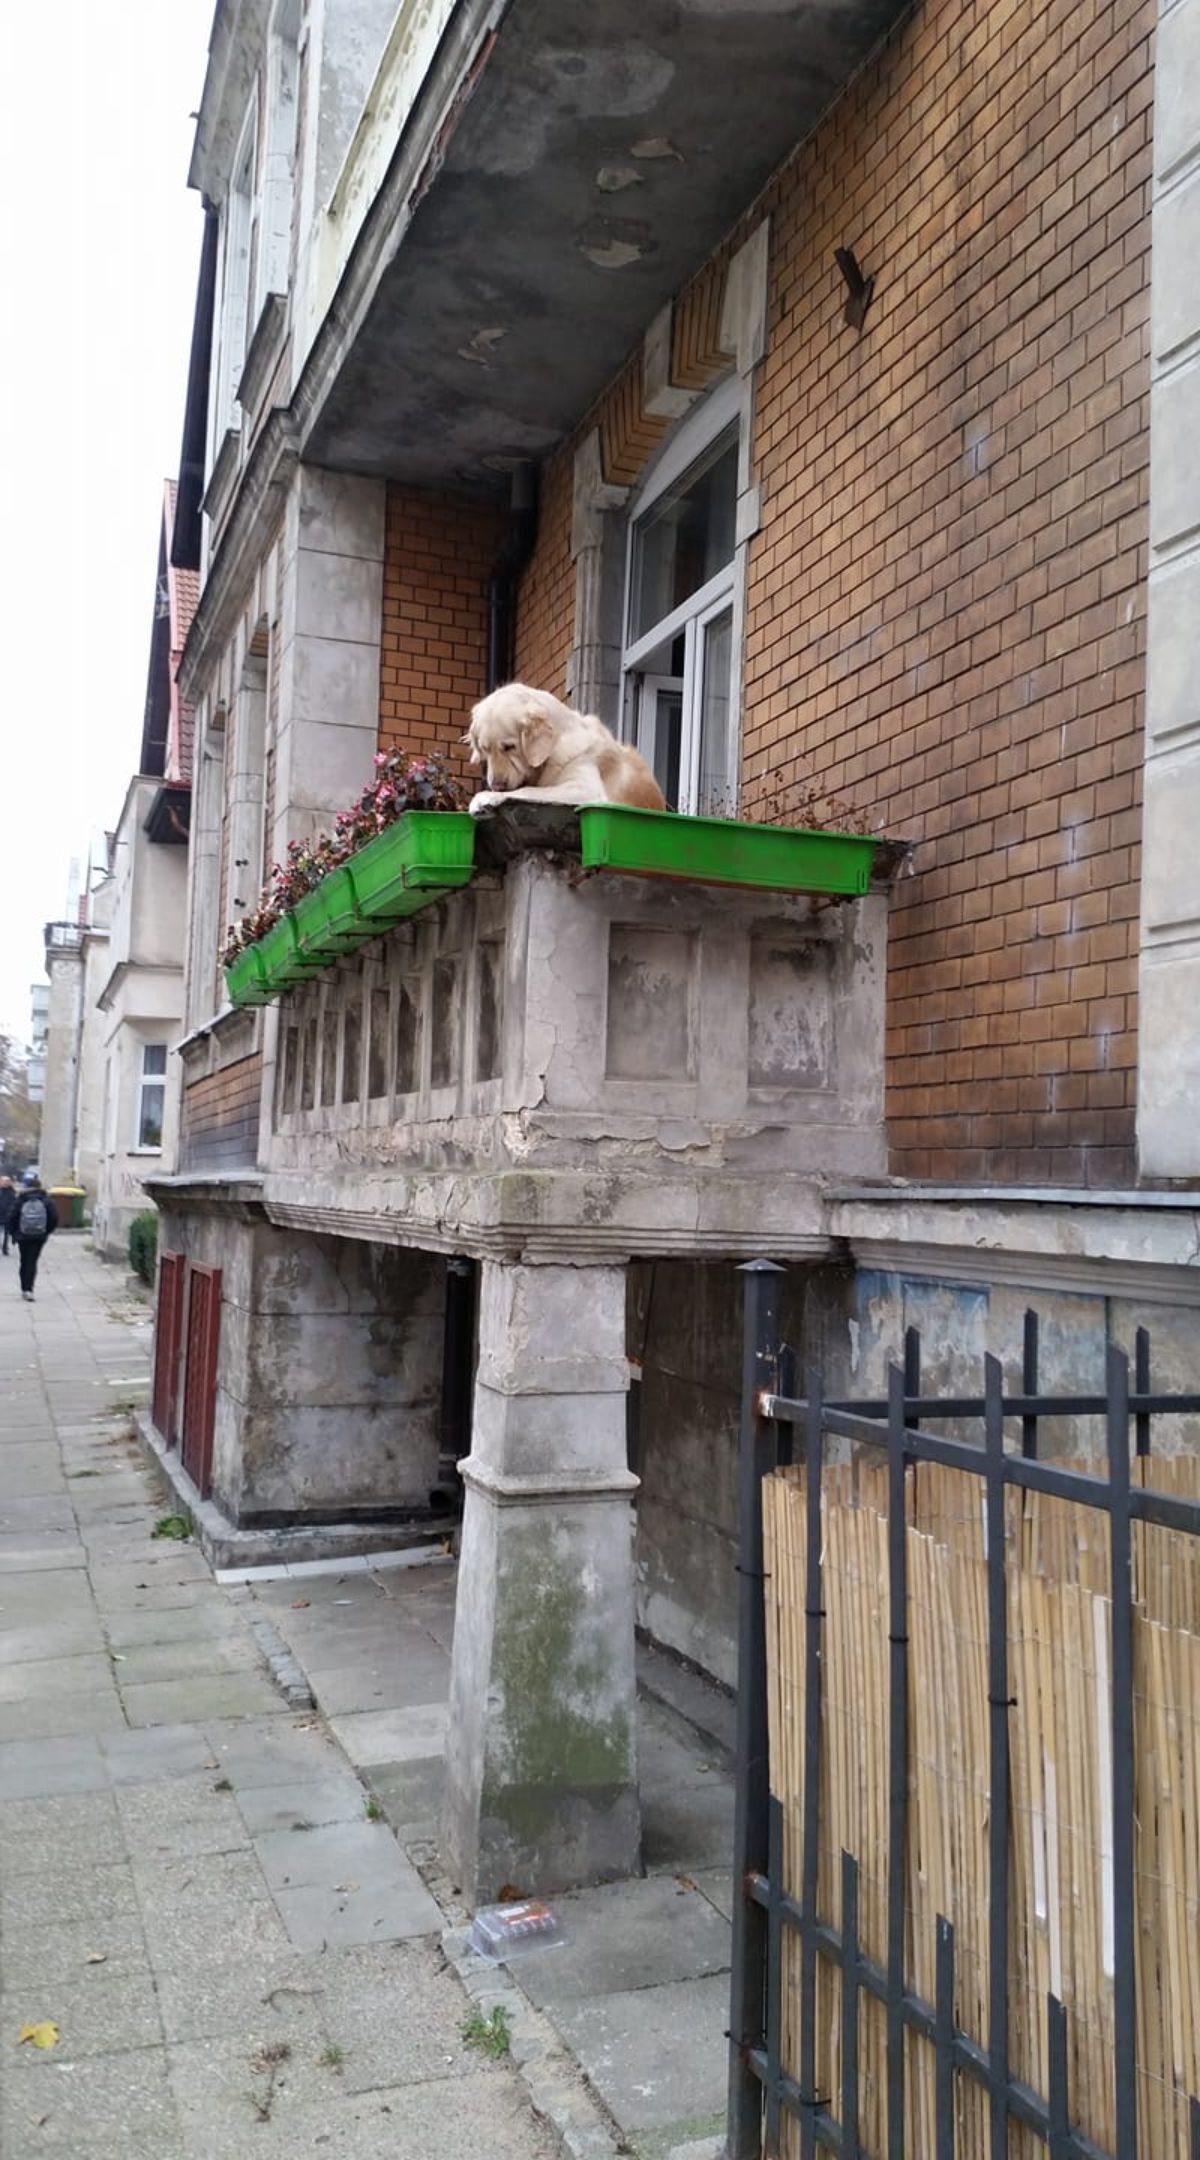 golden retriever hanging over a balcony and licking its paw with green flower pots with pink flowers